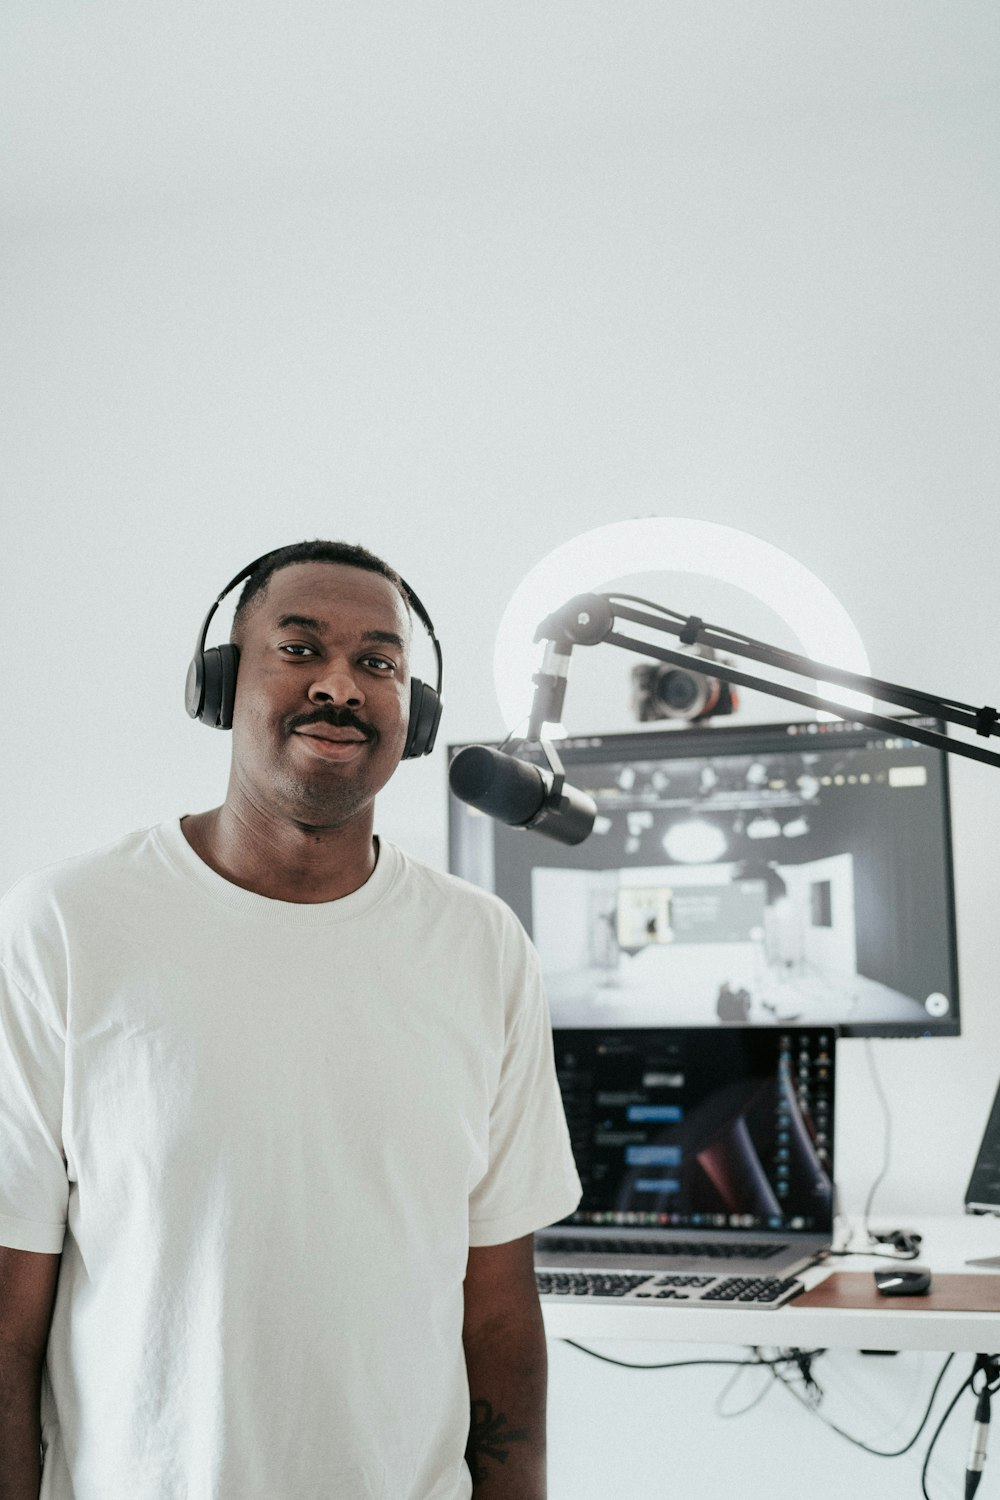 a man wearing headphones standing in front of a microphone